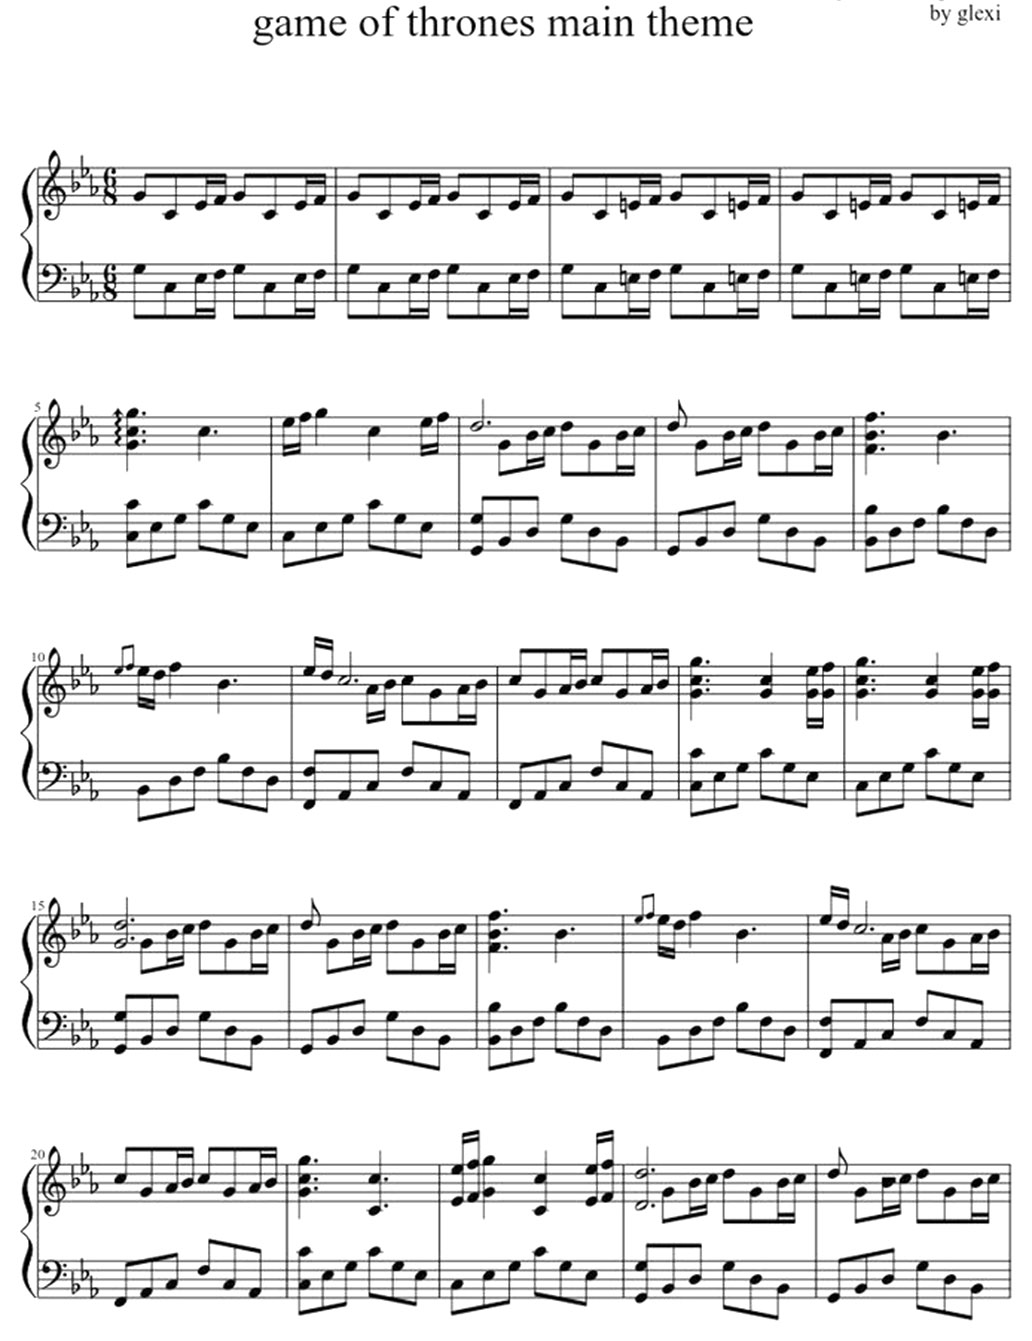 game of thrones (piano sheet music notes)